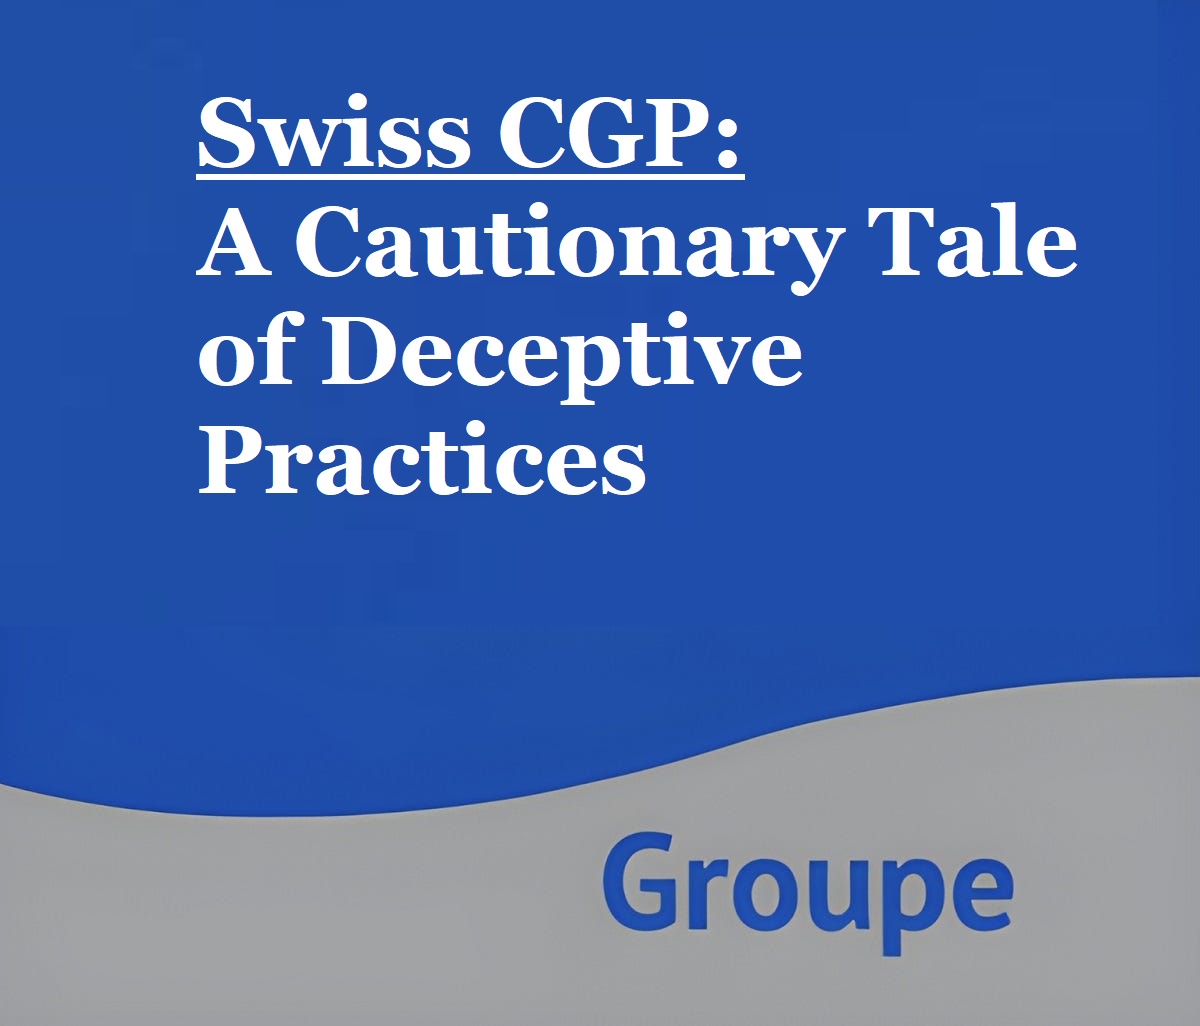 The Dark Truth of Swiss CGP's Payment Practices